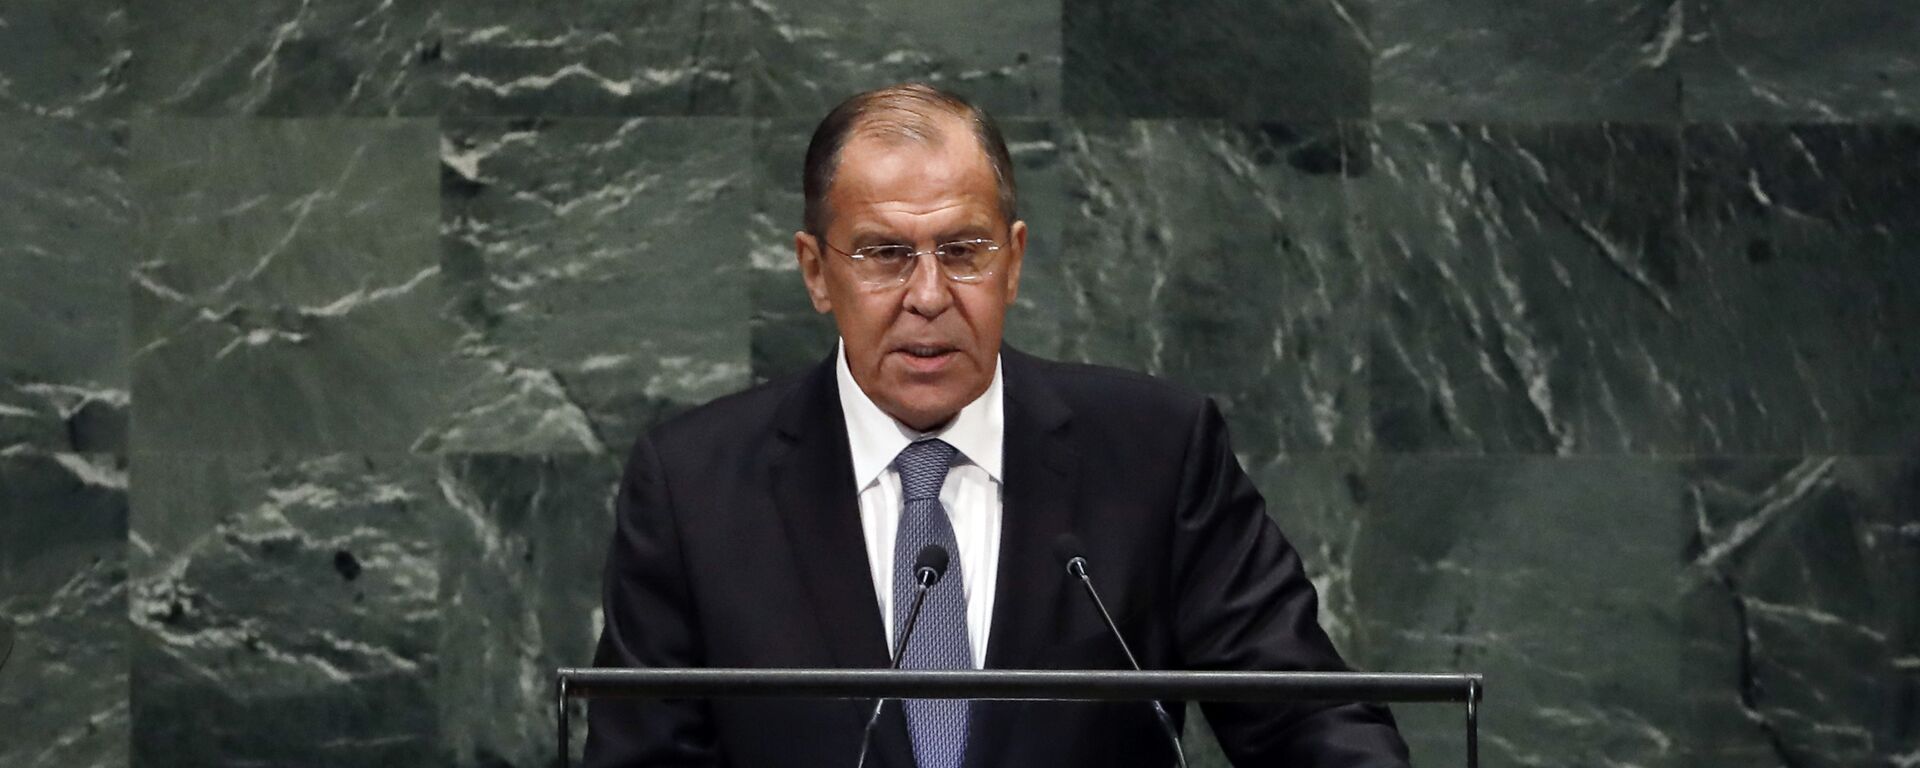 Russia's Foreign Minister Sergey Lavrov addresses the 73rd session of the United Nations General Assembly, at U.N. headquarters, Friday, Sept. 28, 2018 - Sputnik International, 1920, 23.09.2023